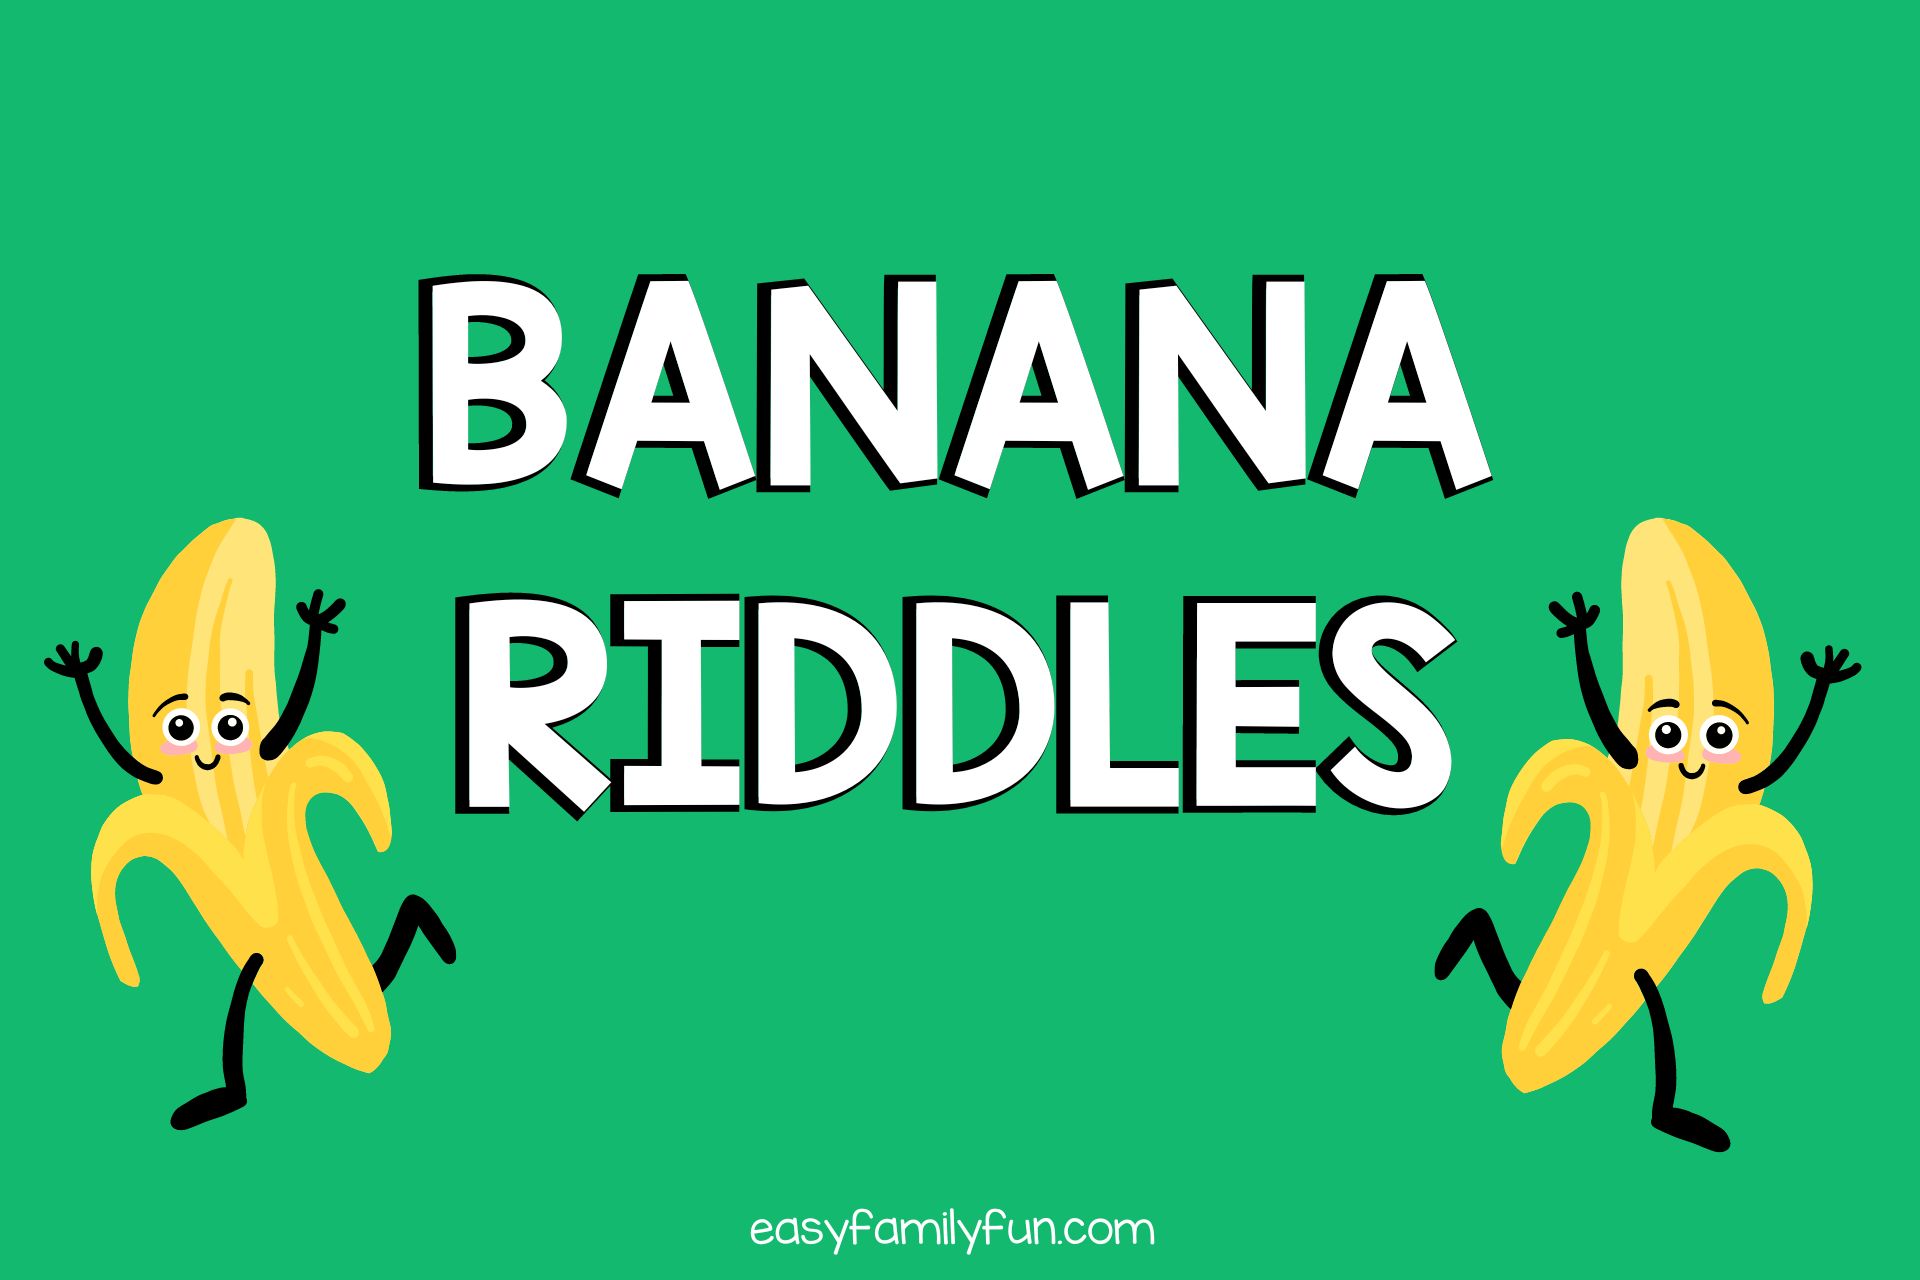 green image with white text that reads Banana Riddles with cartoon bananas around the text